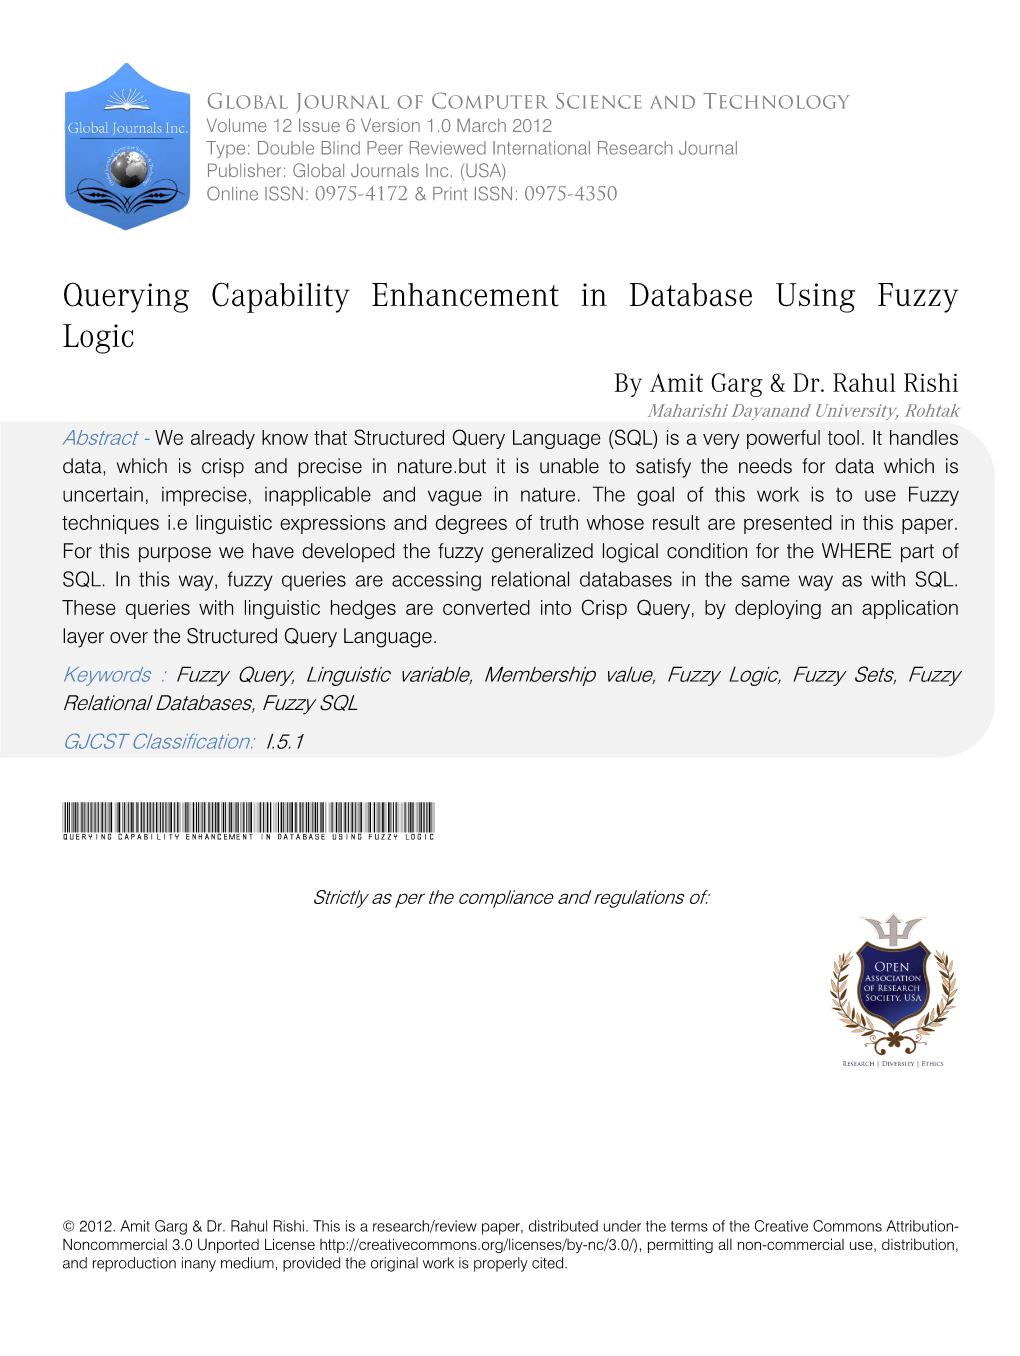 Querying Capability Enhancement in Database Using Fuzzy Logic by Amit Garg & Dr